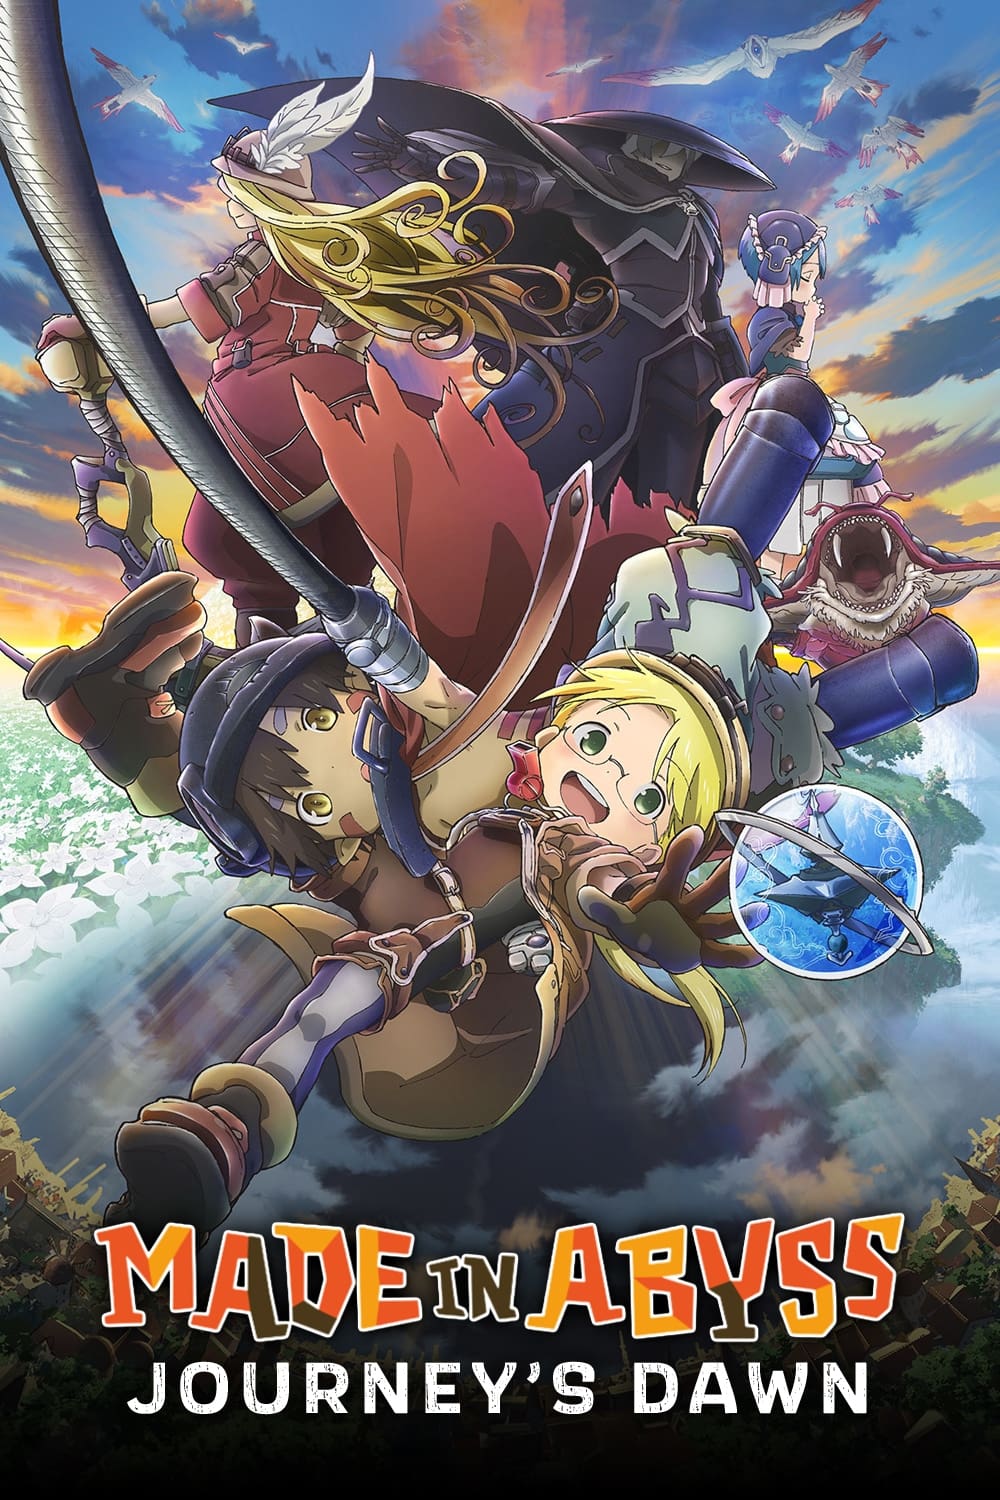 Made in Abyss: Journey's Dawn (2019)